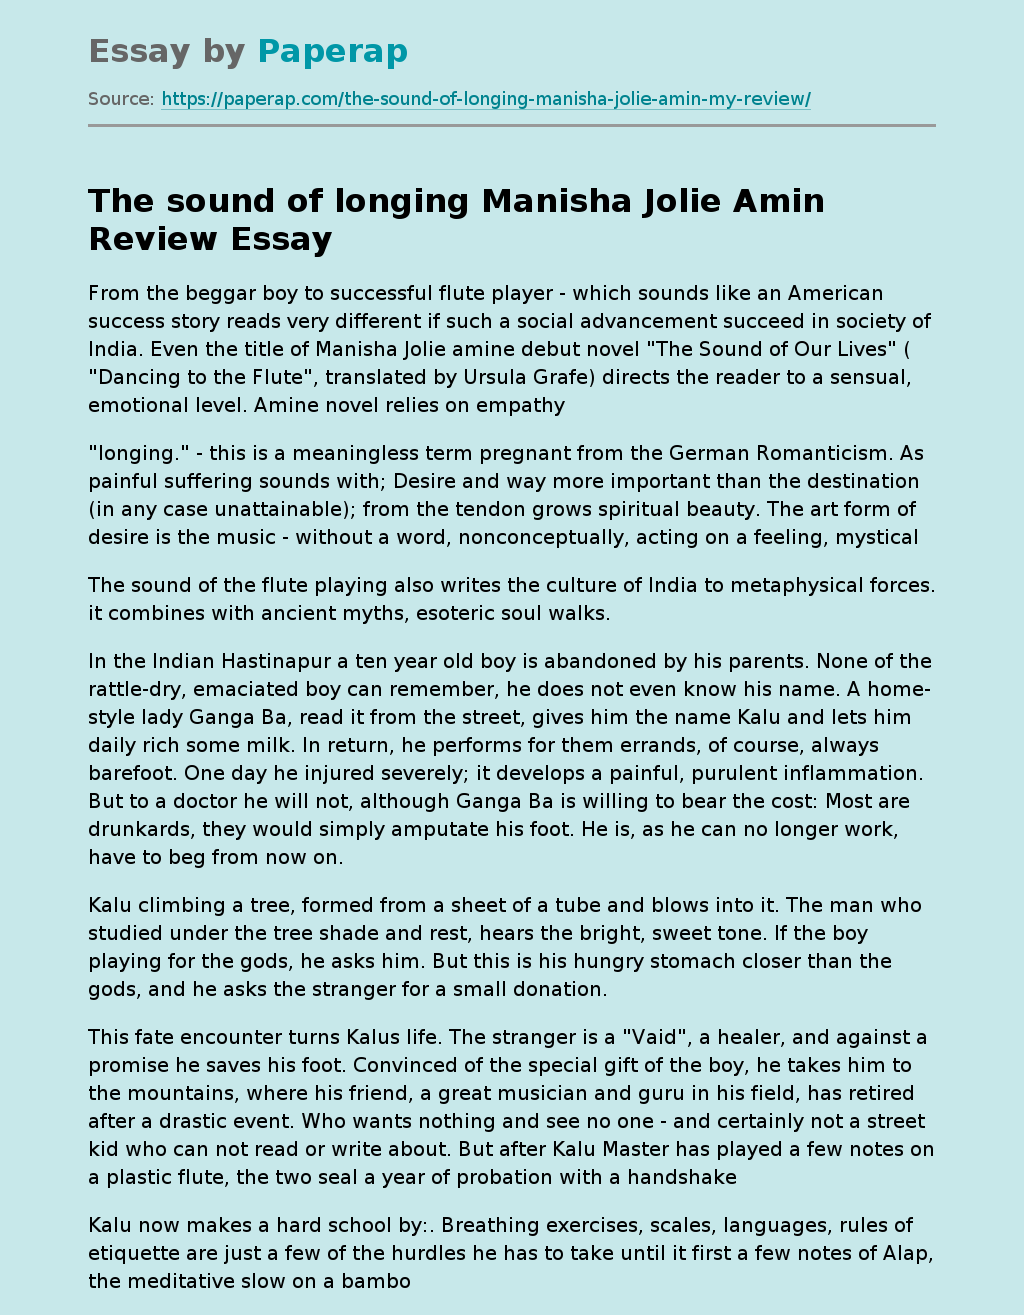 The sound of longing Manisha Jolie Amin Review